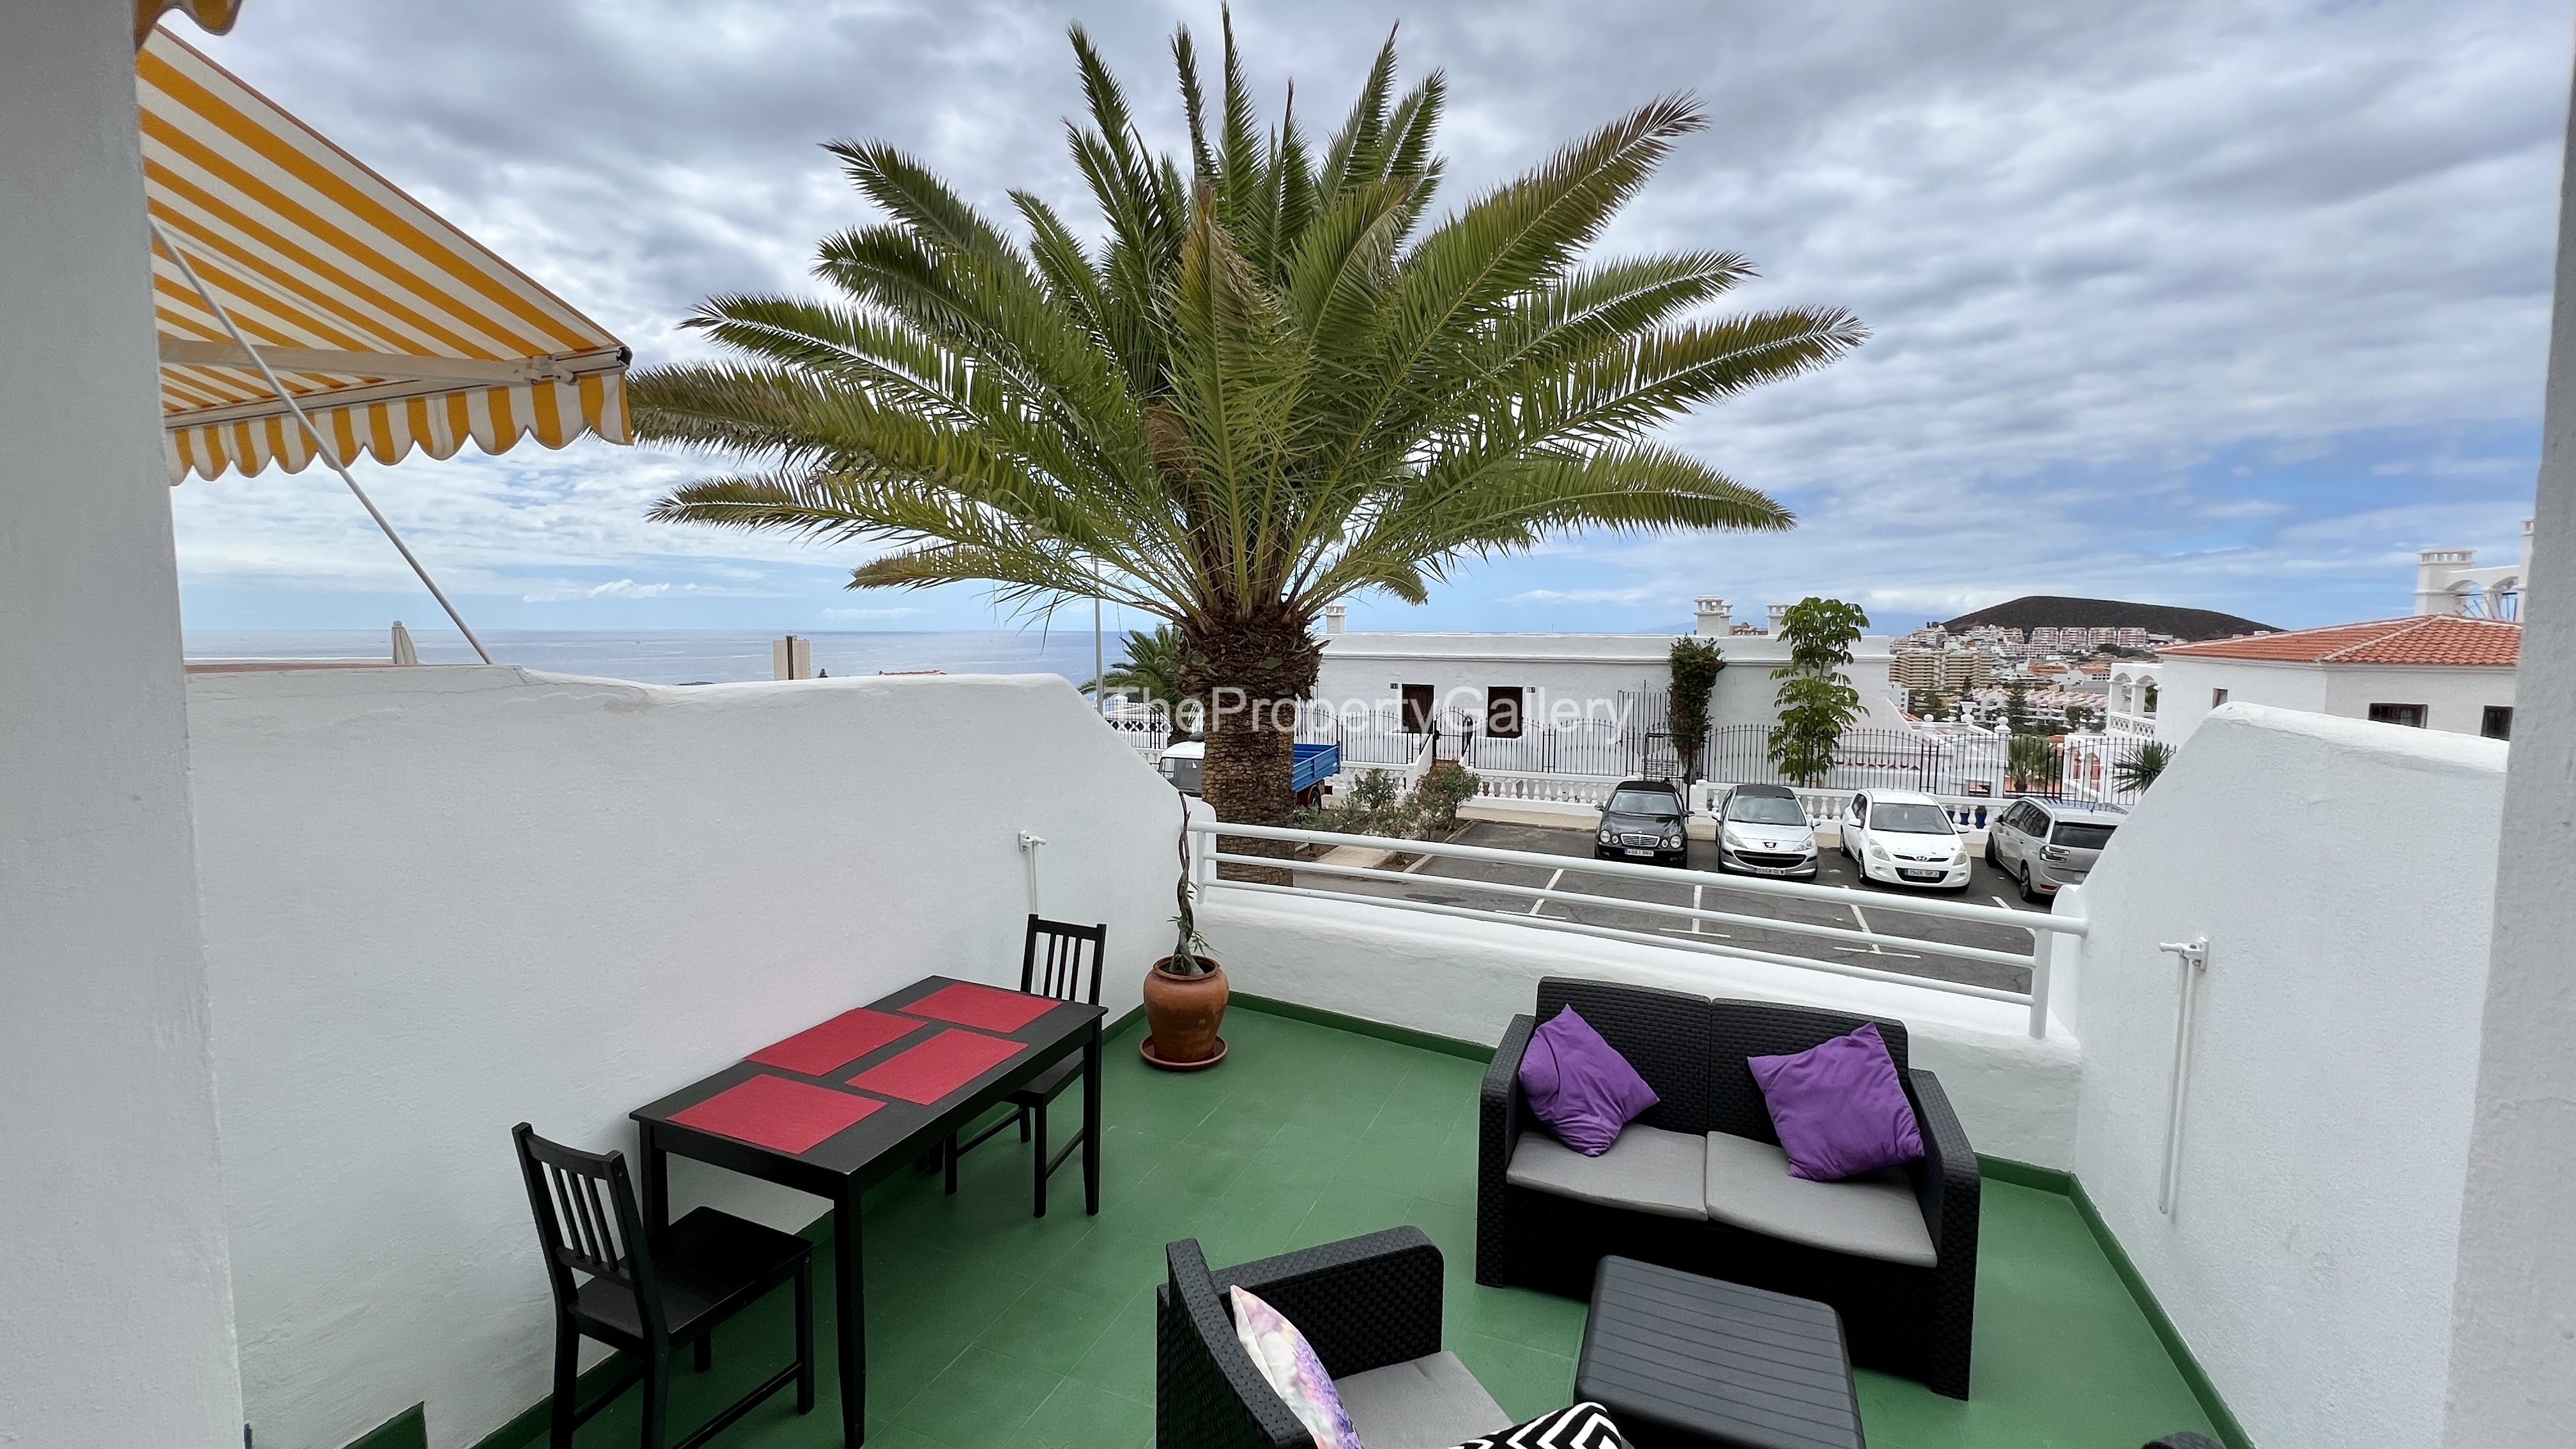 Apartment in Los Cristianos marketed by The Property Gallery